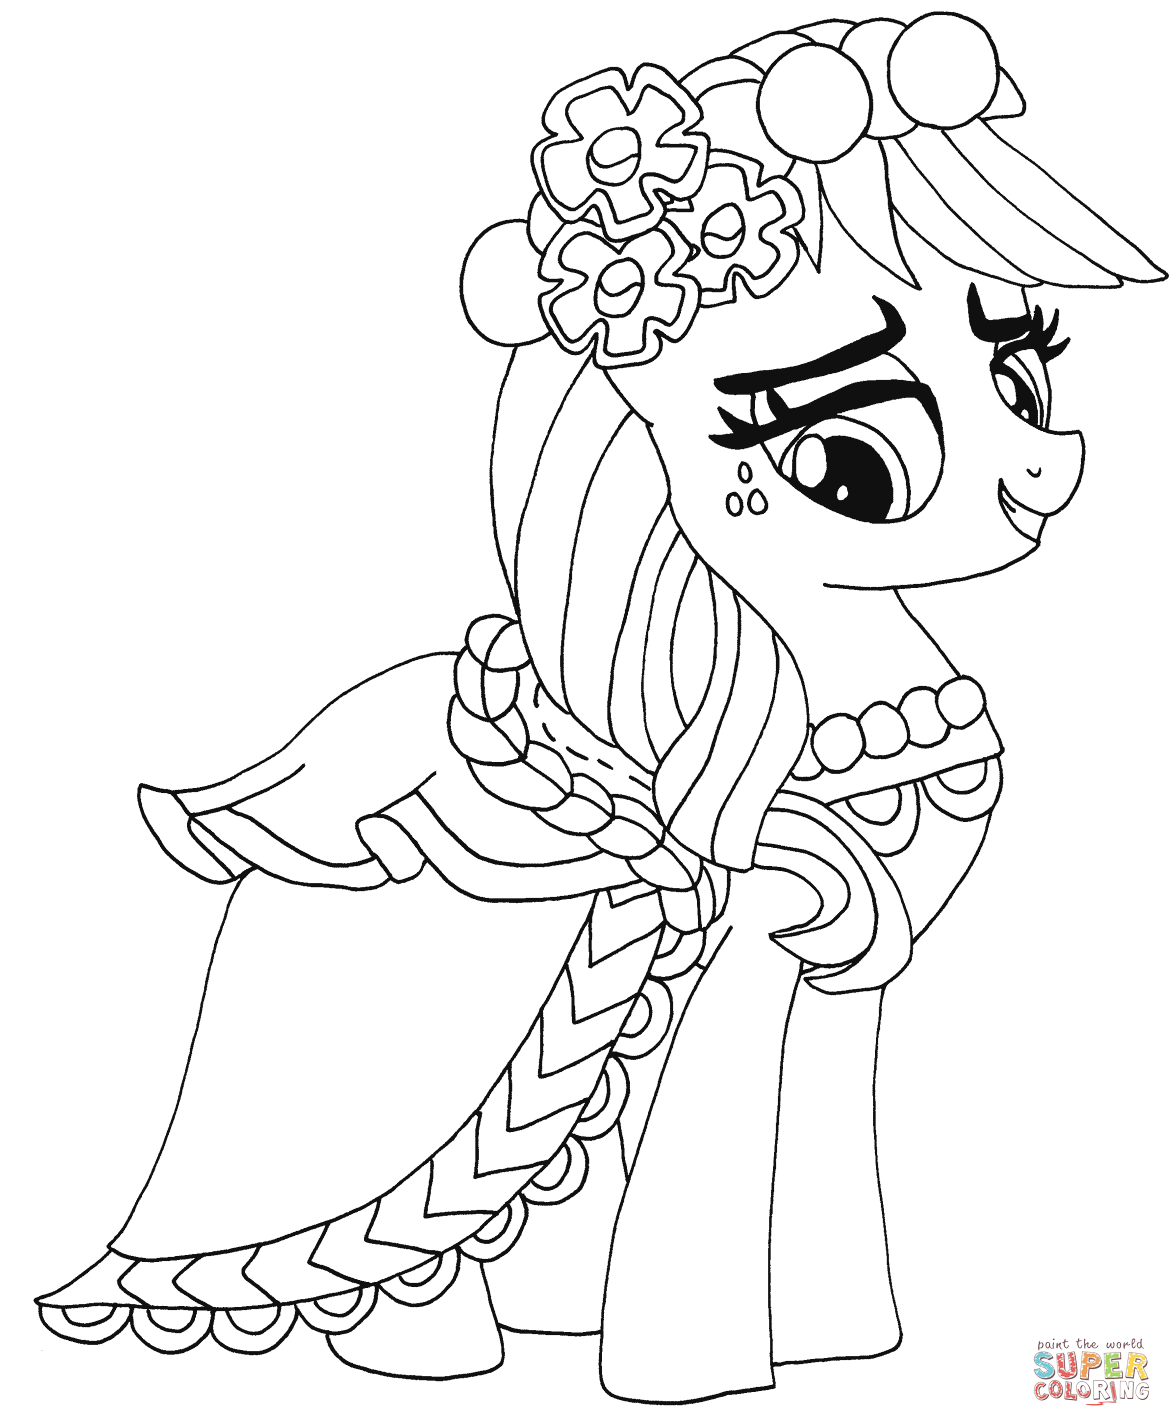 My Little Pony Applejack Coloring Page   Free Printable Coloring ...